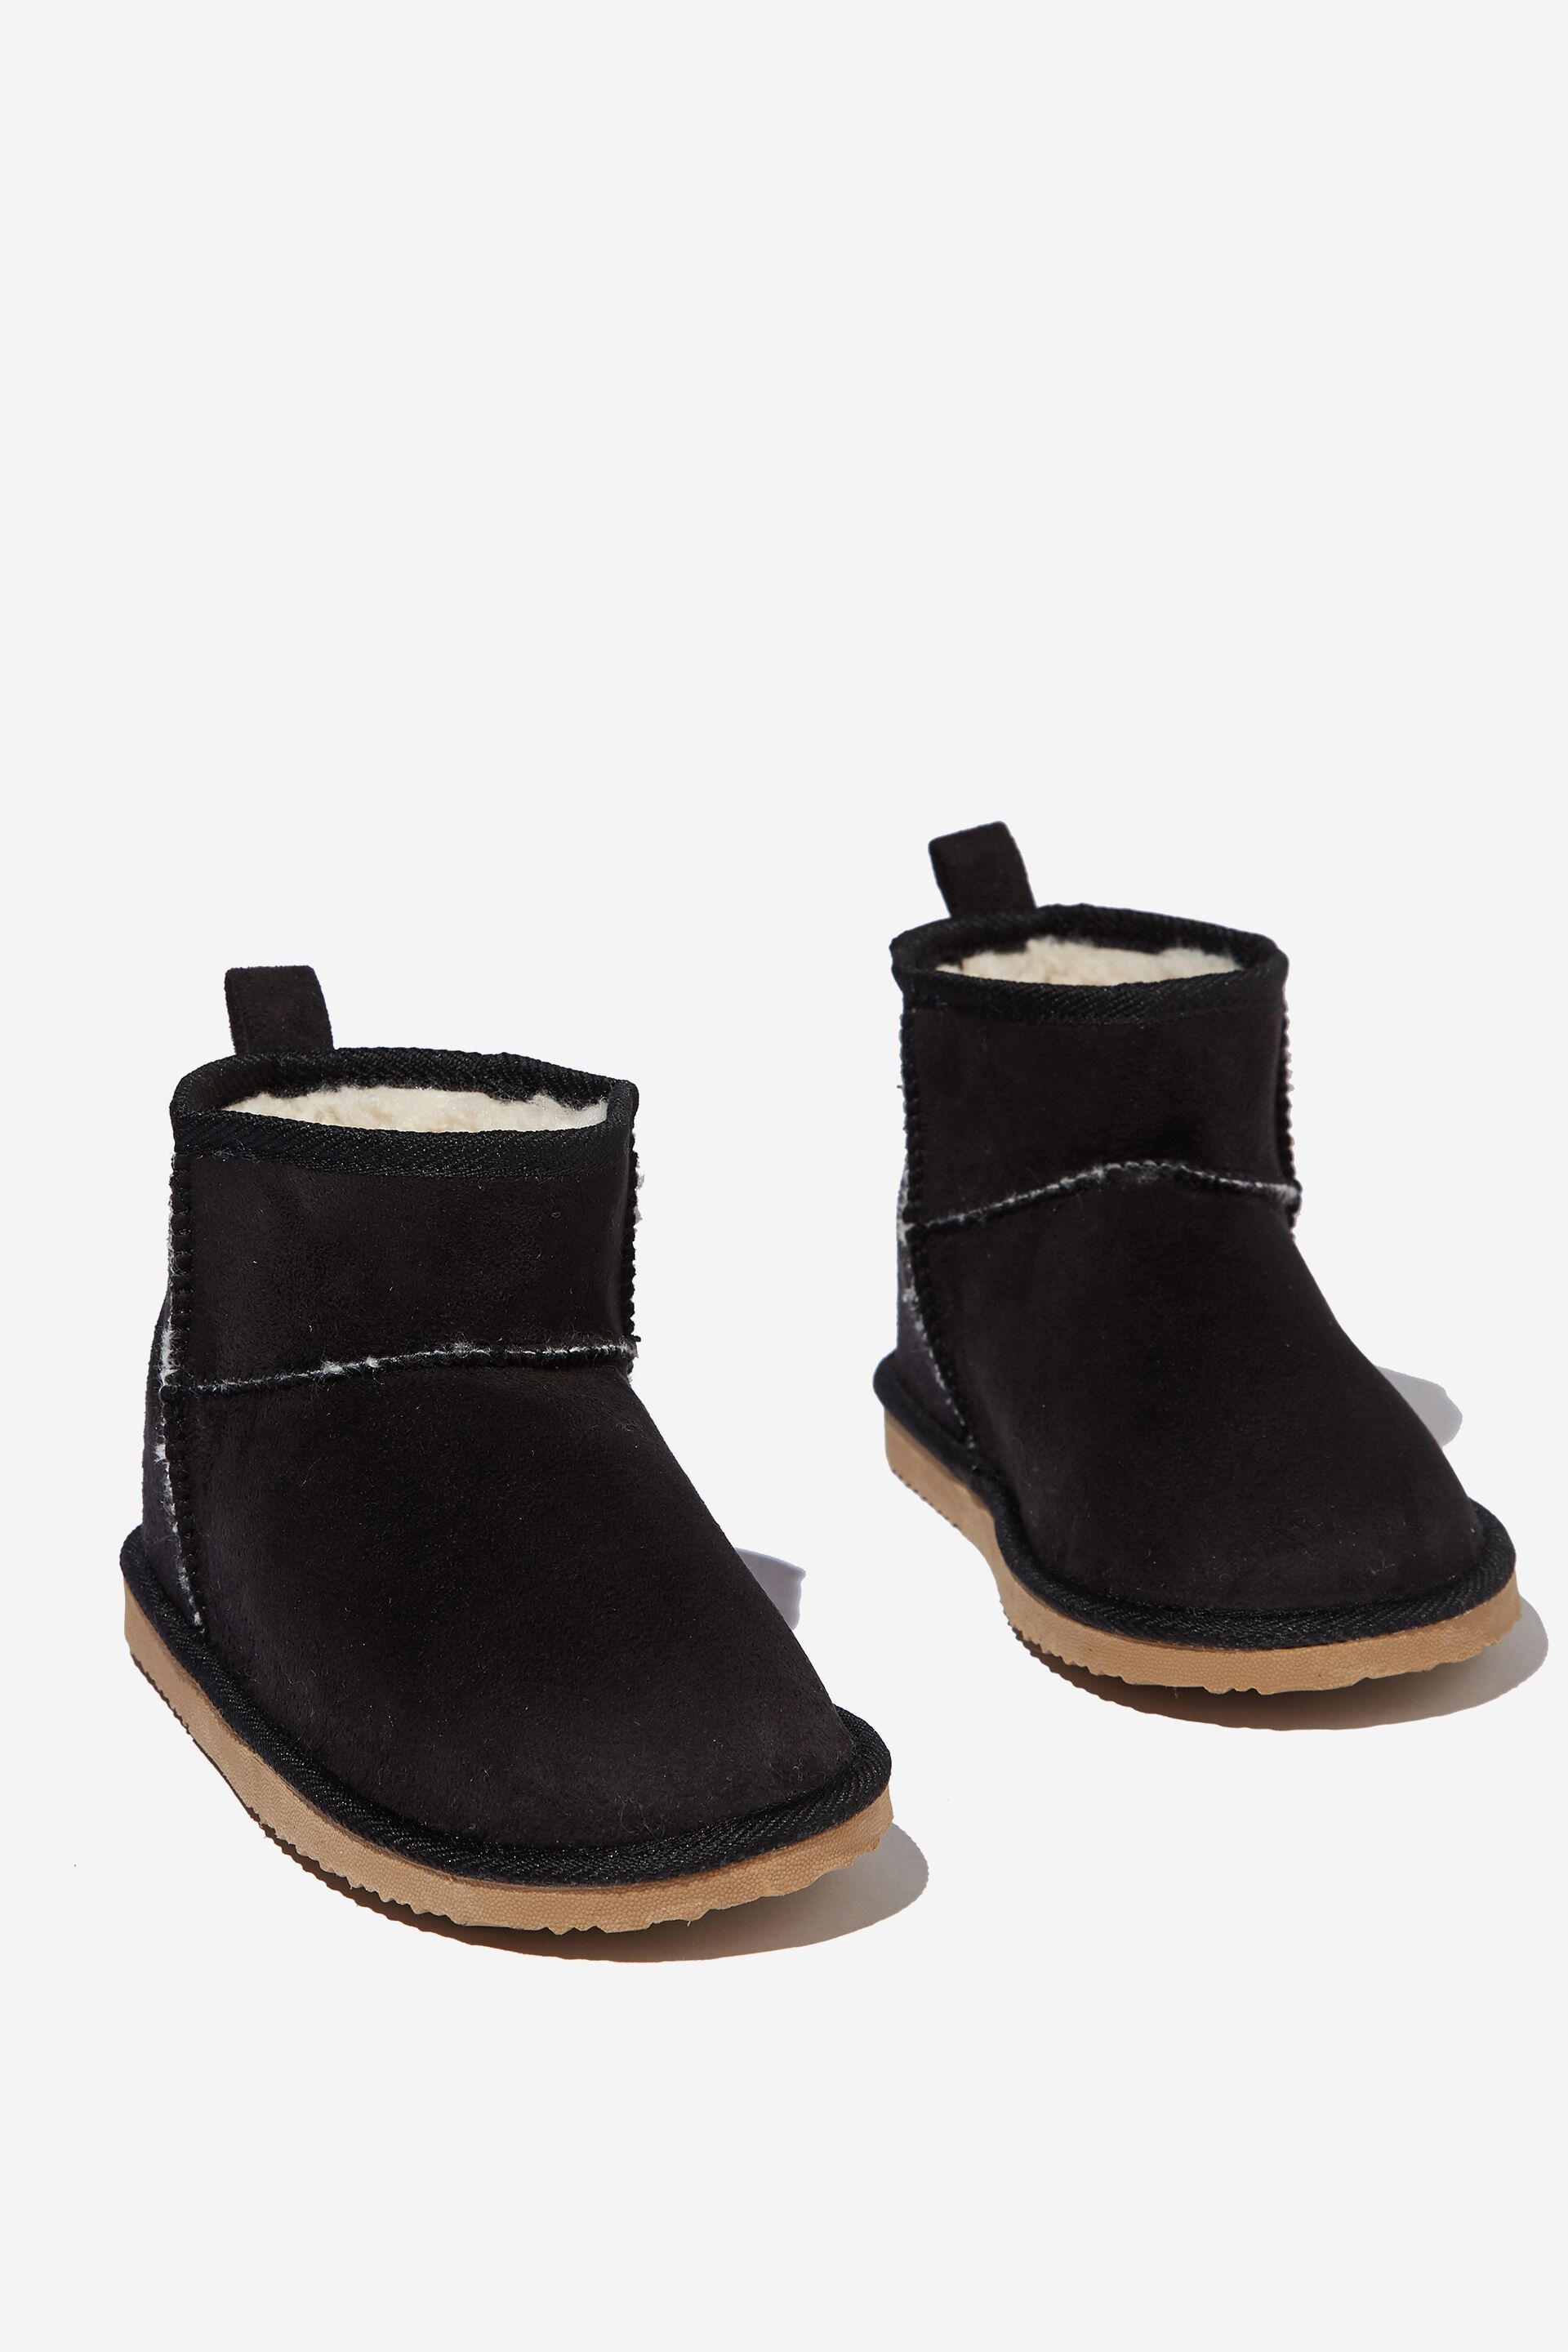 Gifts Gifts For Her | Body Super Cropped Home Boot - RD86894